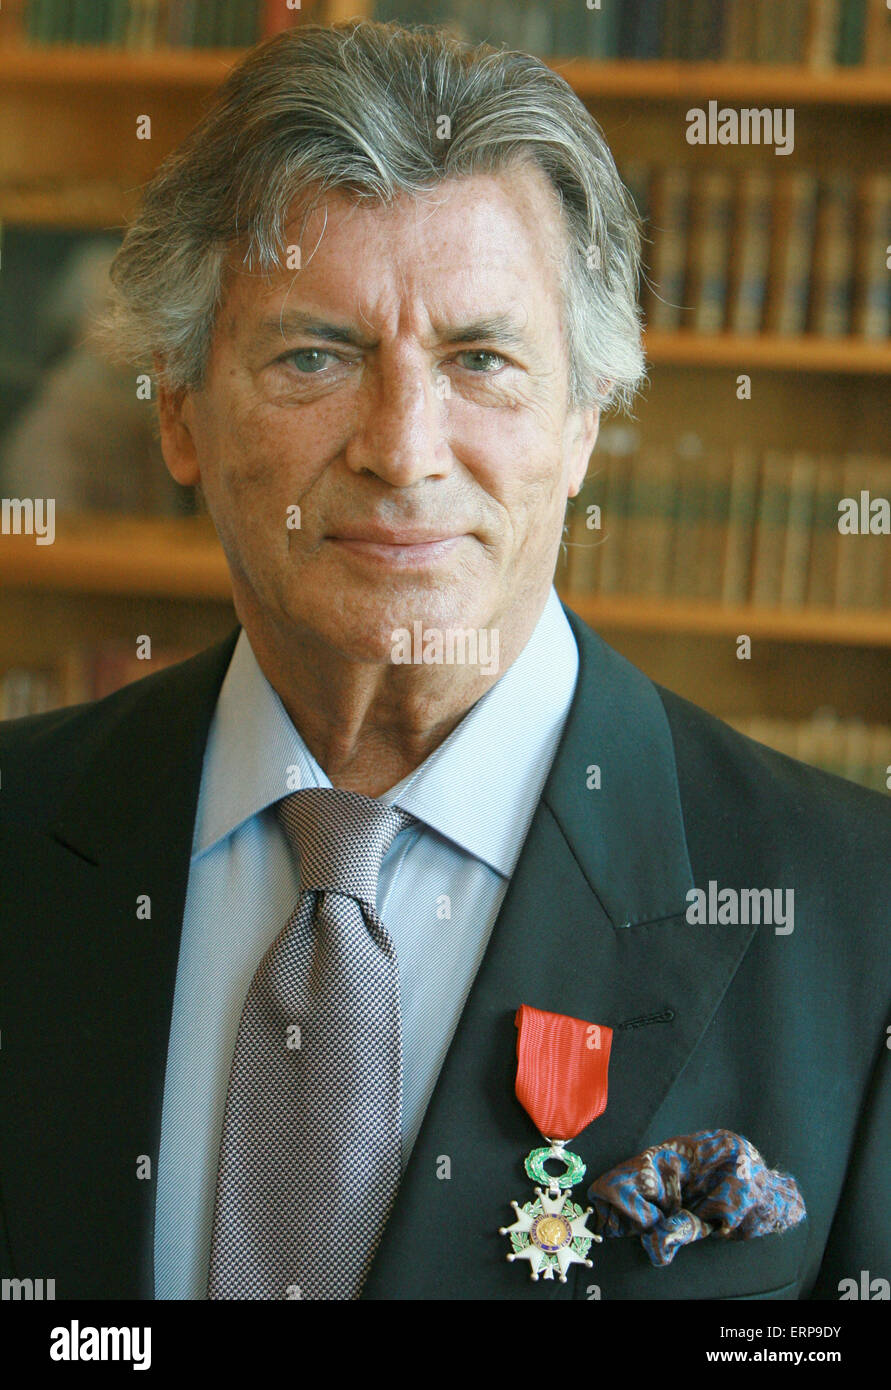 French actor Pierre Brice shows his badge with ribbon of a Knight of the French Legion of Honour after it was awarded to him by French Ambassador to Germany in Berlin, 07 June 2007. France honoured the actor who has impersonated Karl May's famous Winnetou character and as Unicef Ambassador is commited to the struggle against children's poverty and human rights abuse. Photo: Jens Kalaene Stock Photo